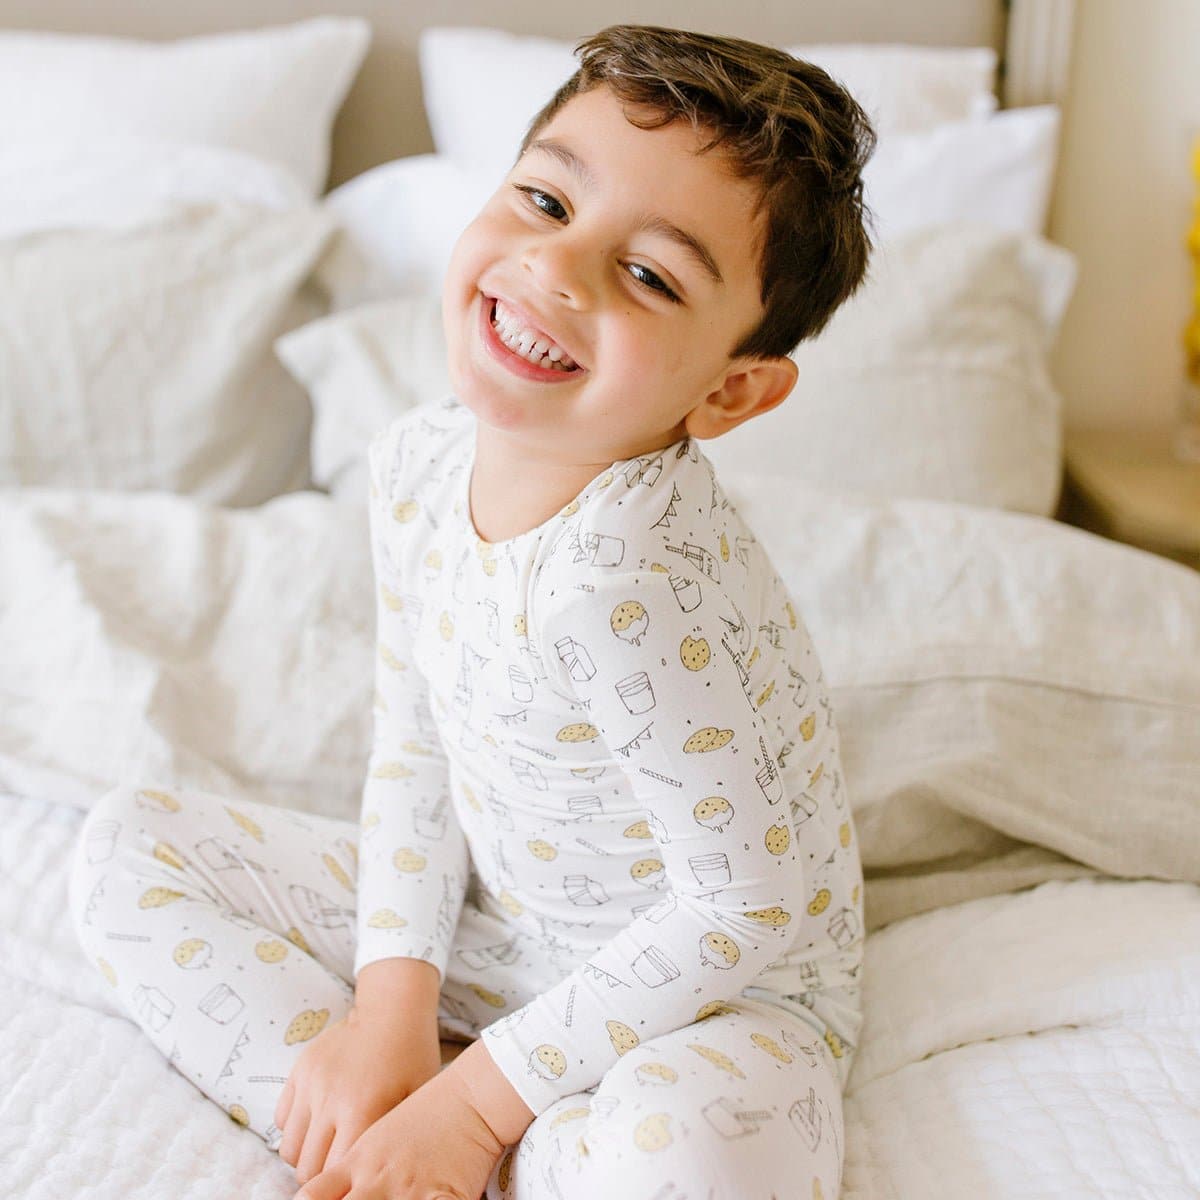 All Pajamas – Biscuit Home